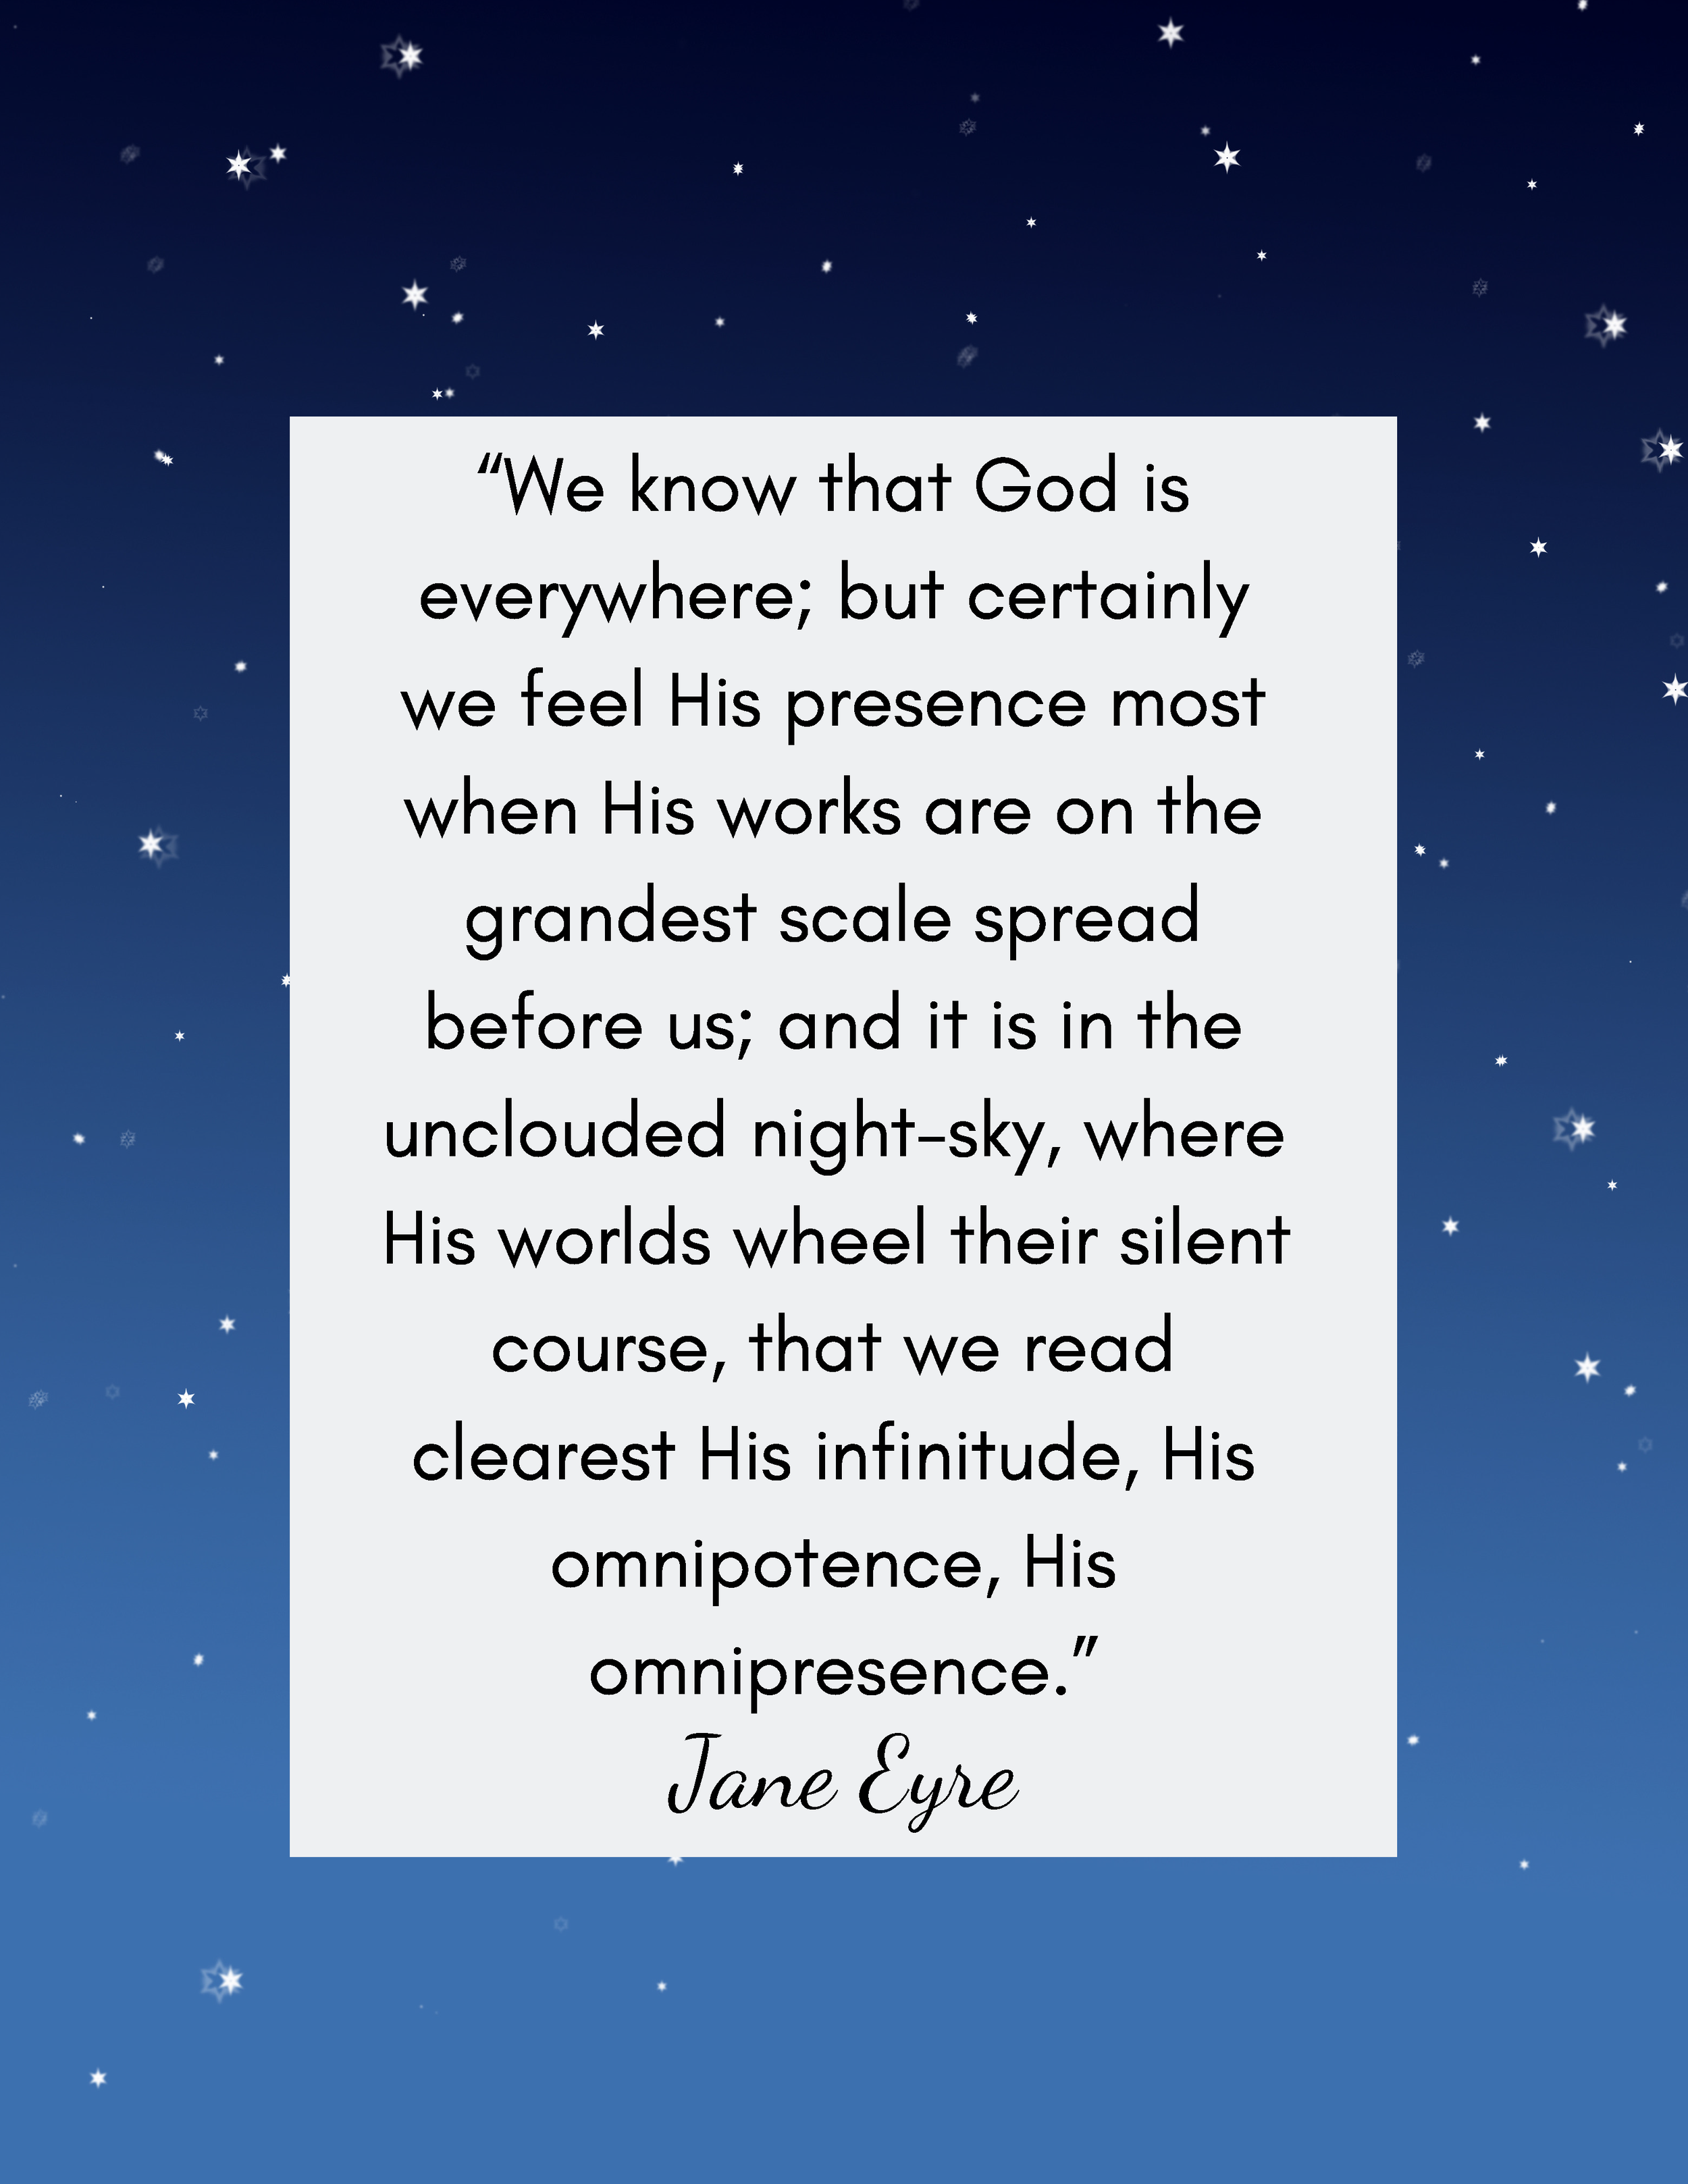 Jane+Eyre+God+quote.png